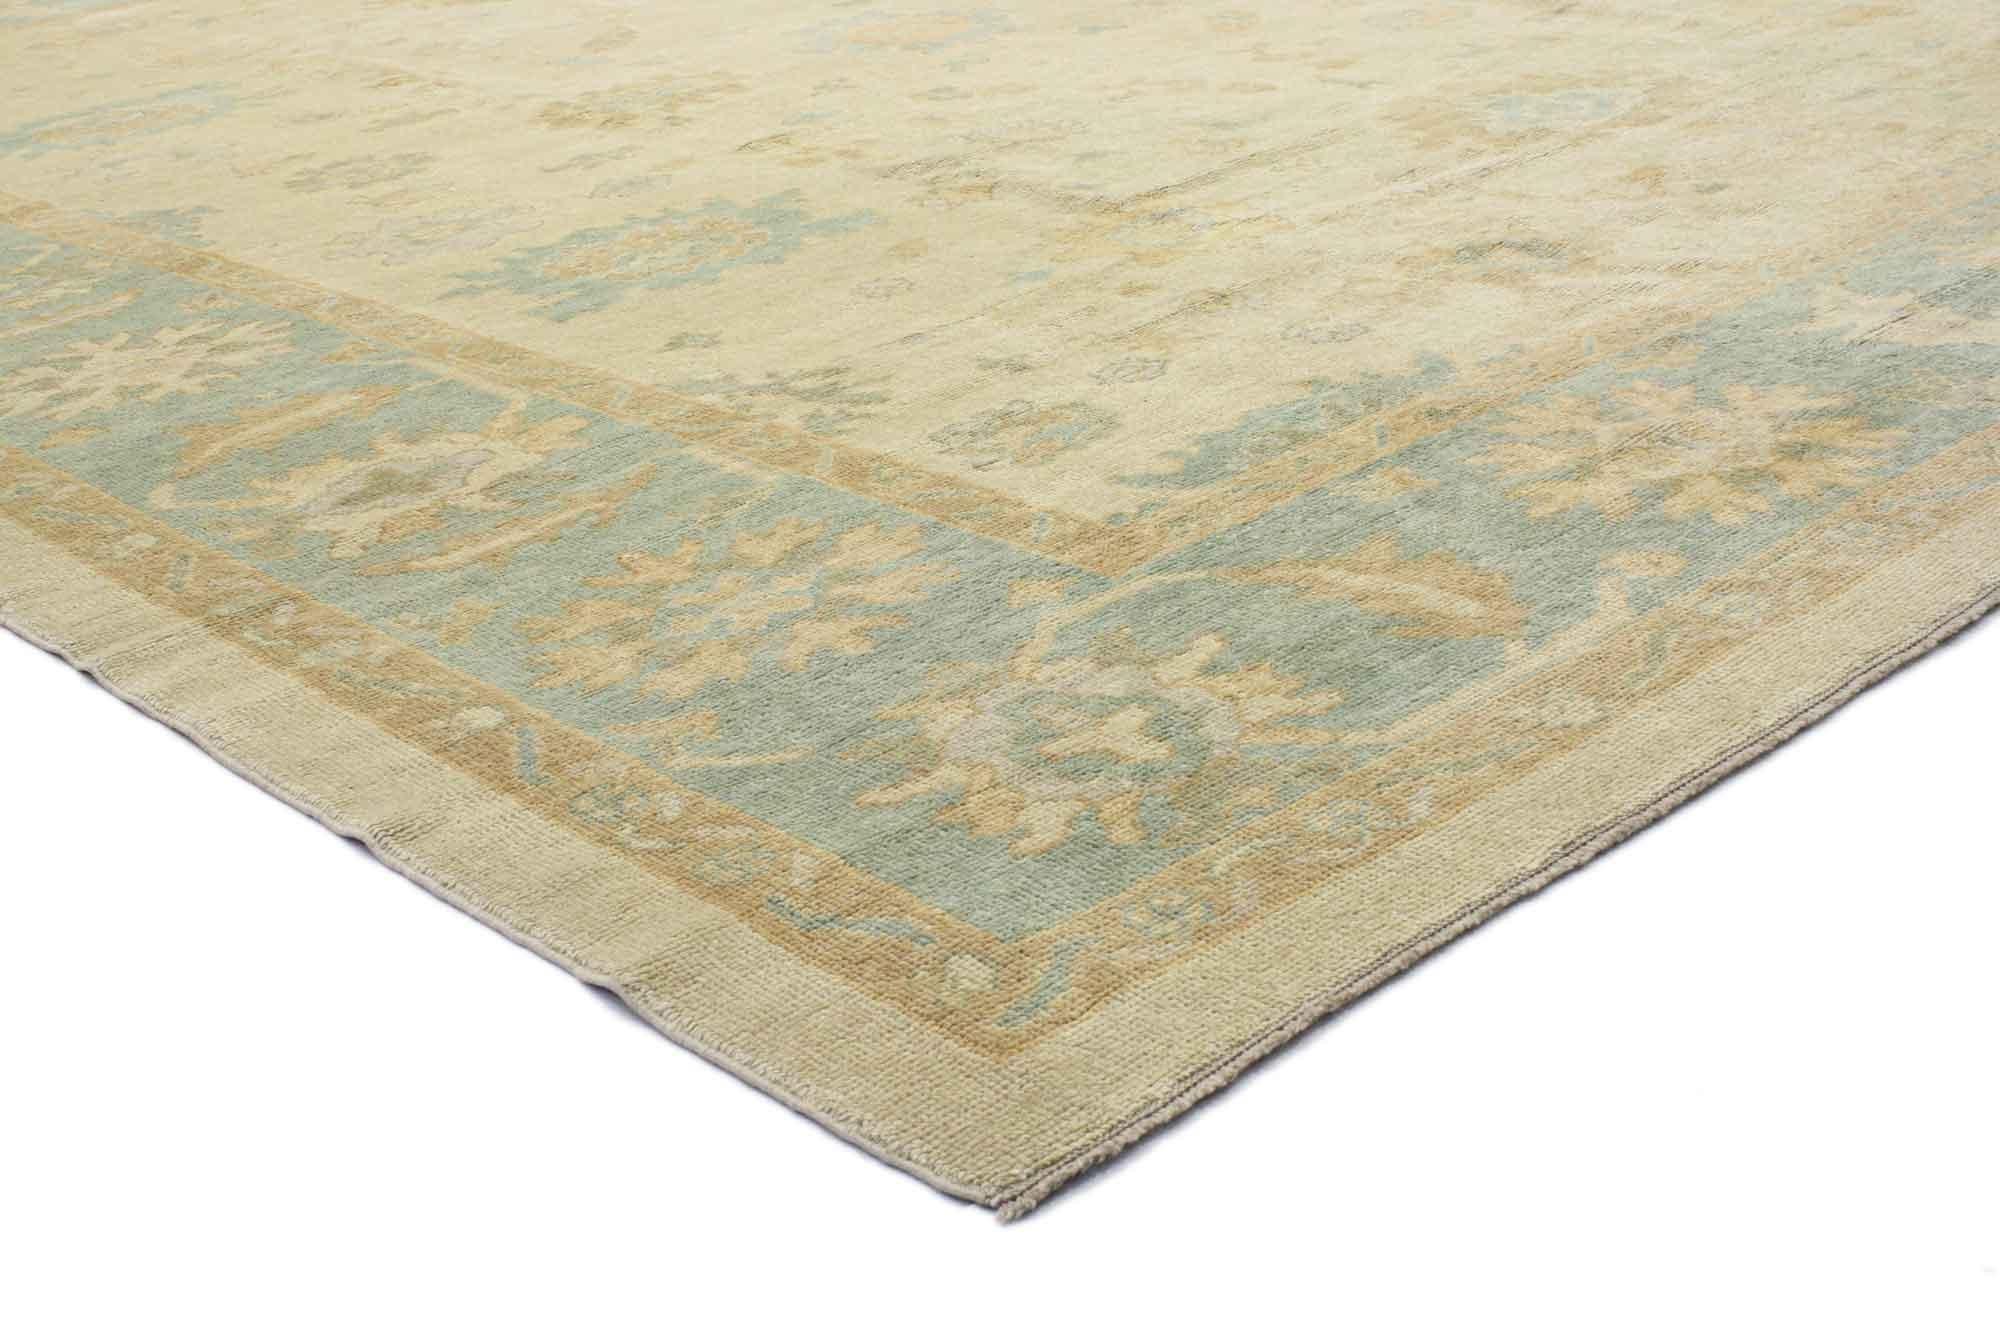 50731 New large Turkish Oushak rug, 12'10 x 15'08. With its soft colors, incredible detail and texture, this hand knotted wool Turkish Oushak rug is a captivating vision of woven beauty. The timeless botanical design and tranquil hues woven into